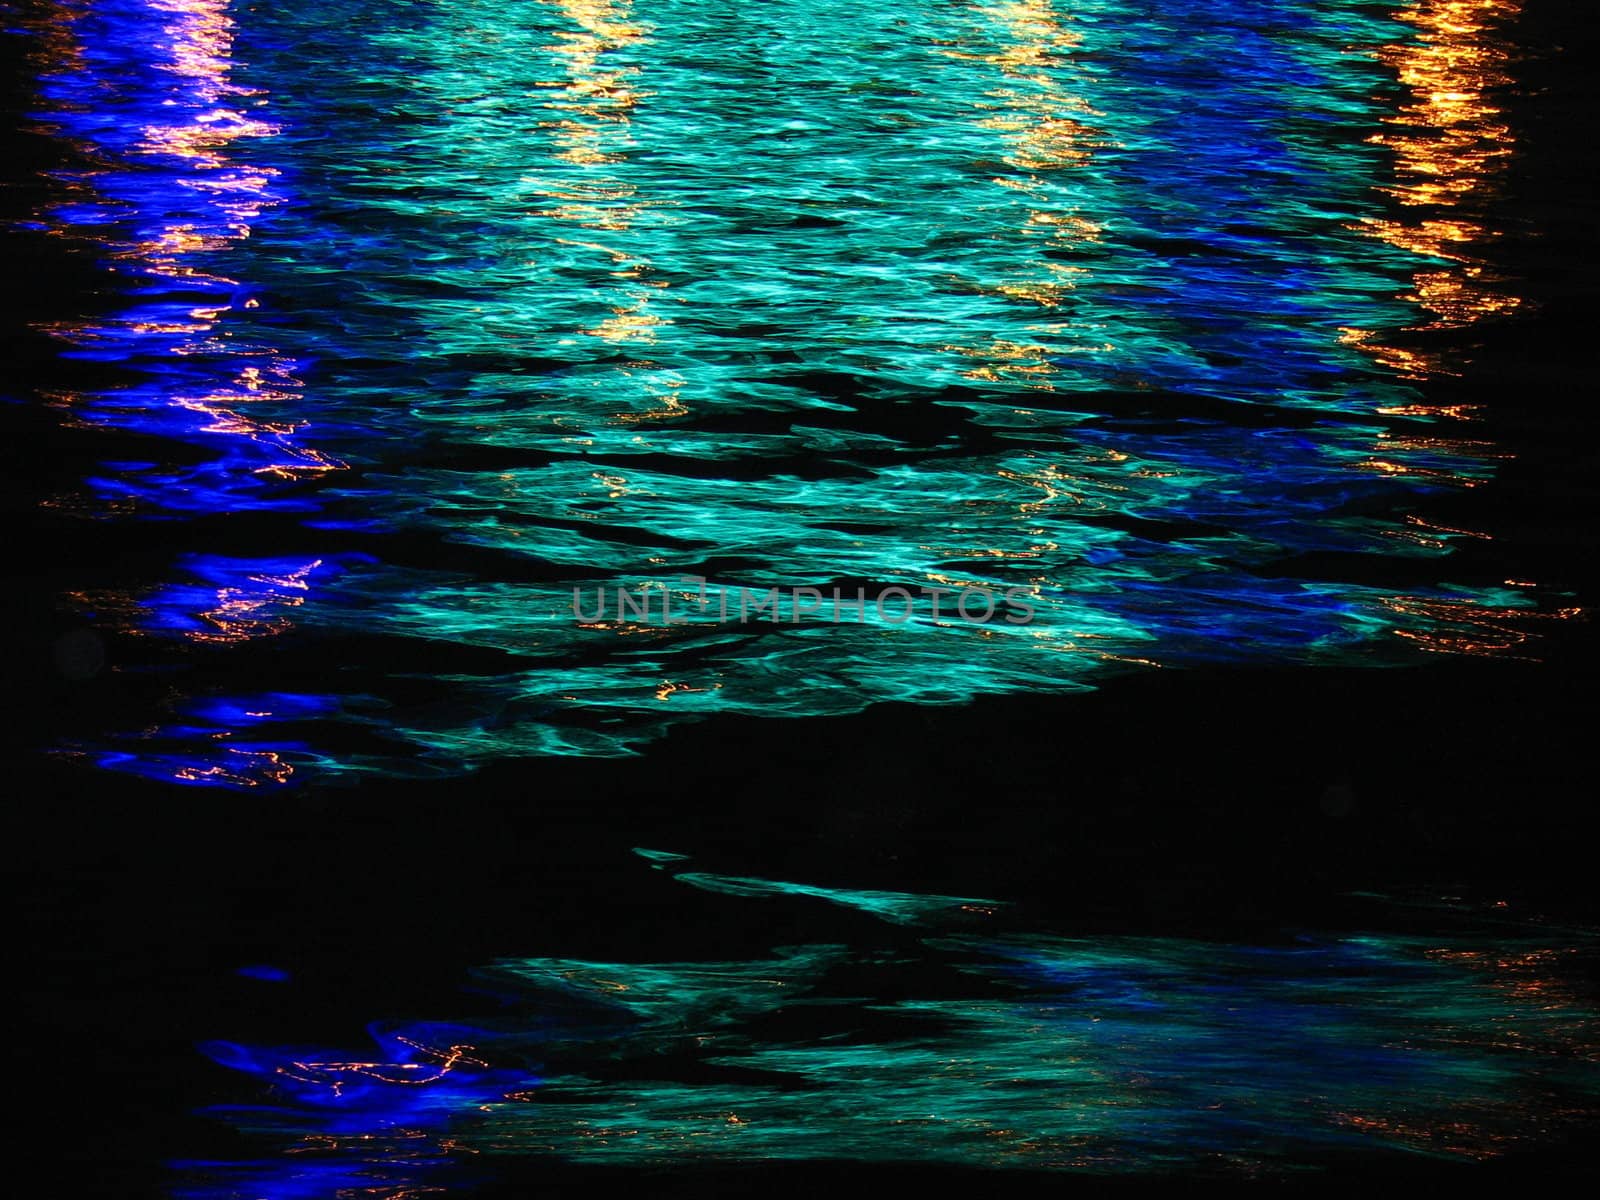 Sity light reflection on the river wave. by Vitamin